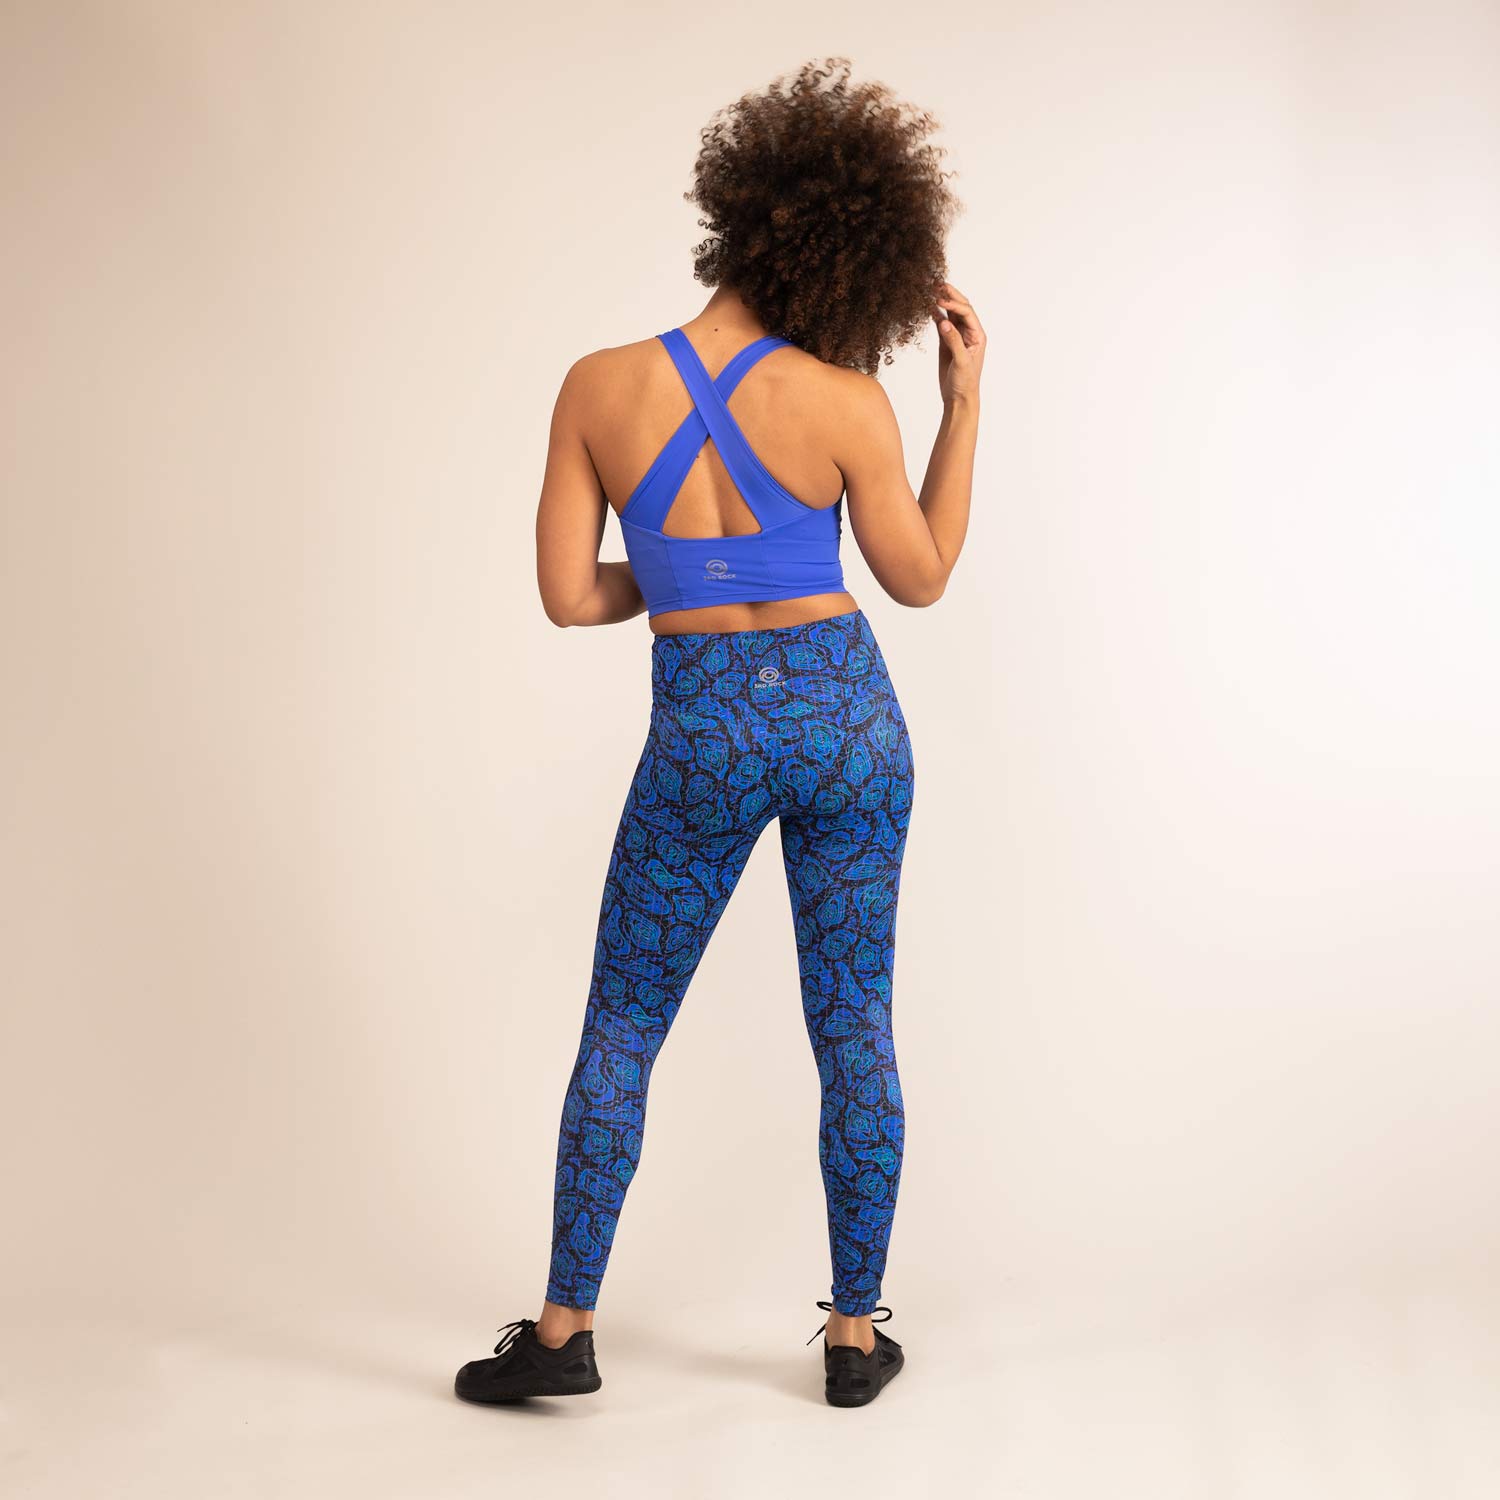 TITAN GEO JAGUAR LEGGINGS | Printed Recycled Leggings | 3RD ROCK Clothing -  Kendal is 5ft 7 with a 28" waist, 38" hips and wears a size 12 F